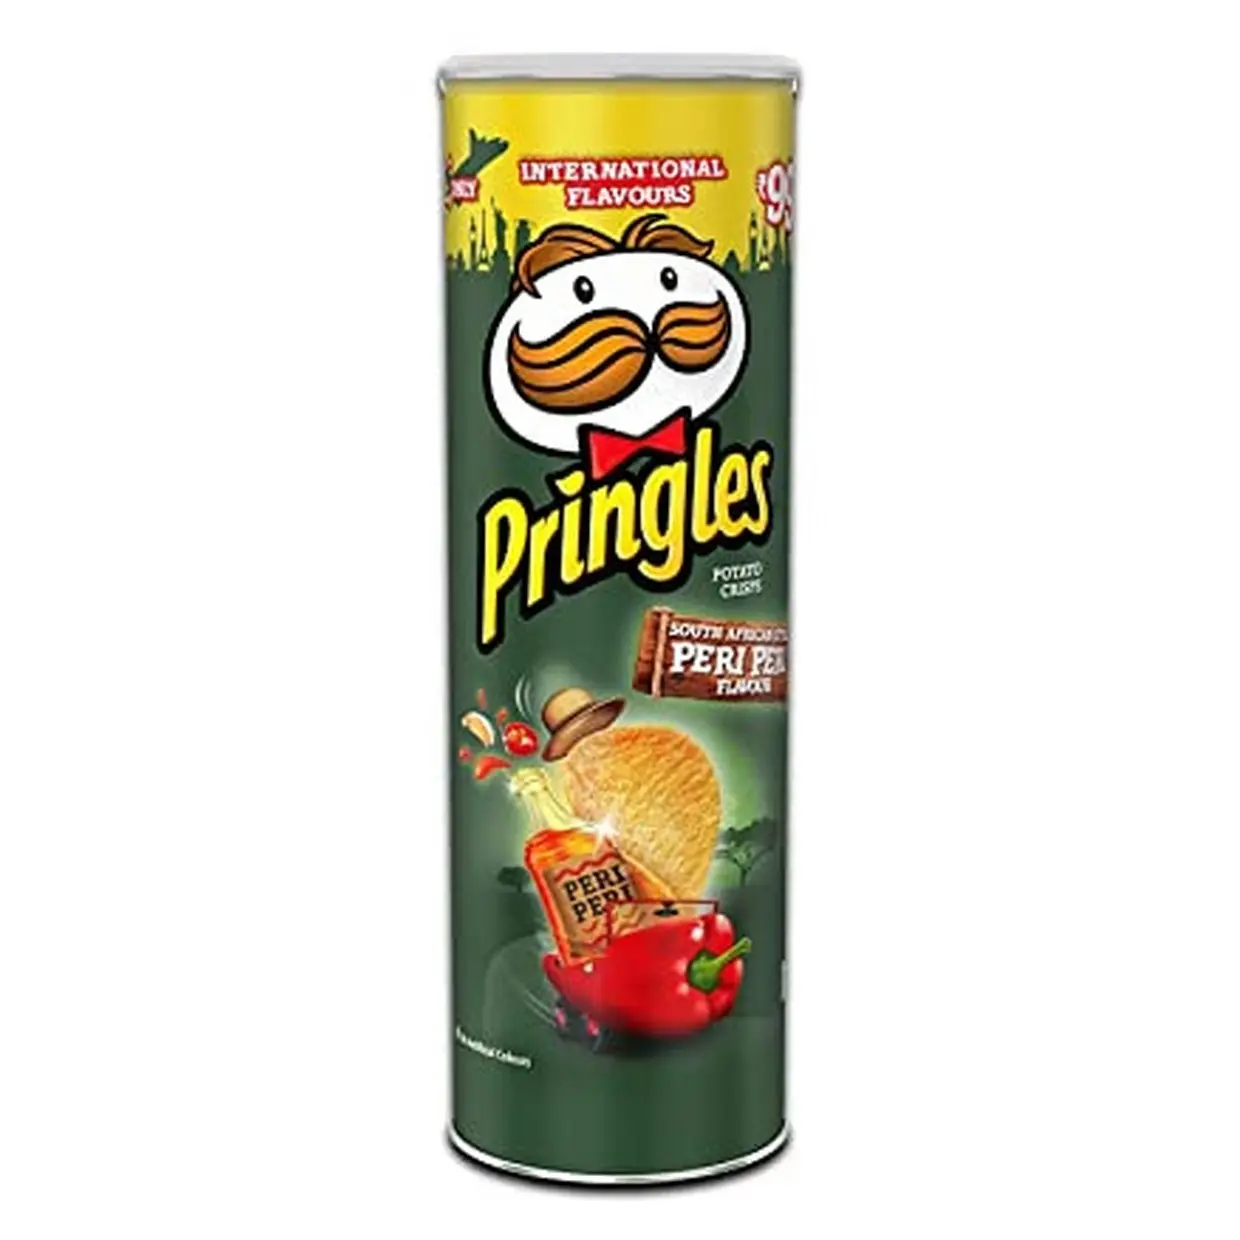 Pringles Original Brand 19 pcs x 165 gr Hot Spicy Flavored Chips All The Time Fresh Stock